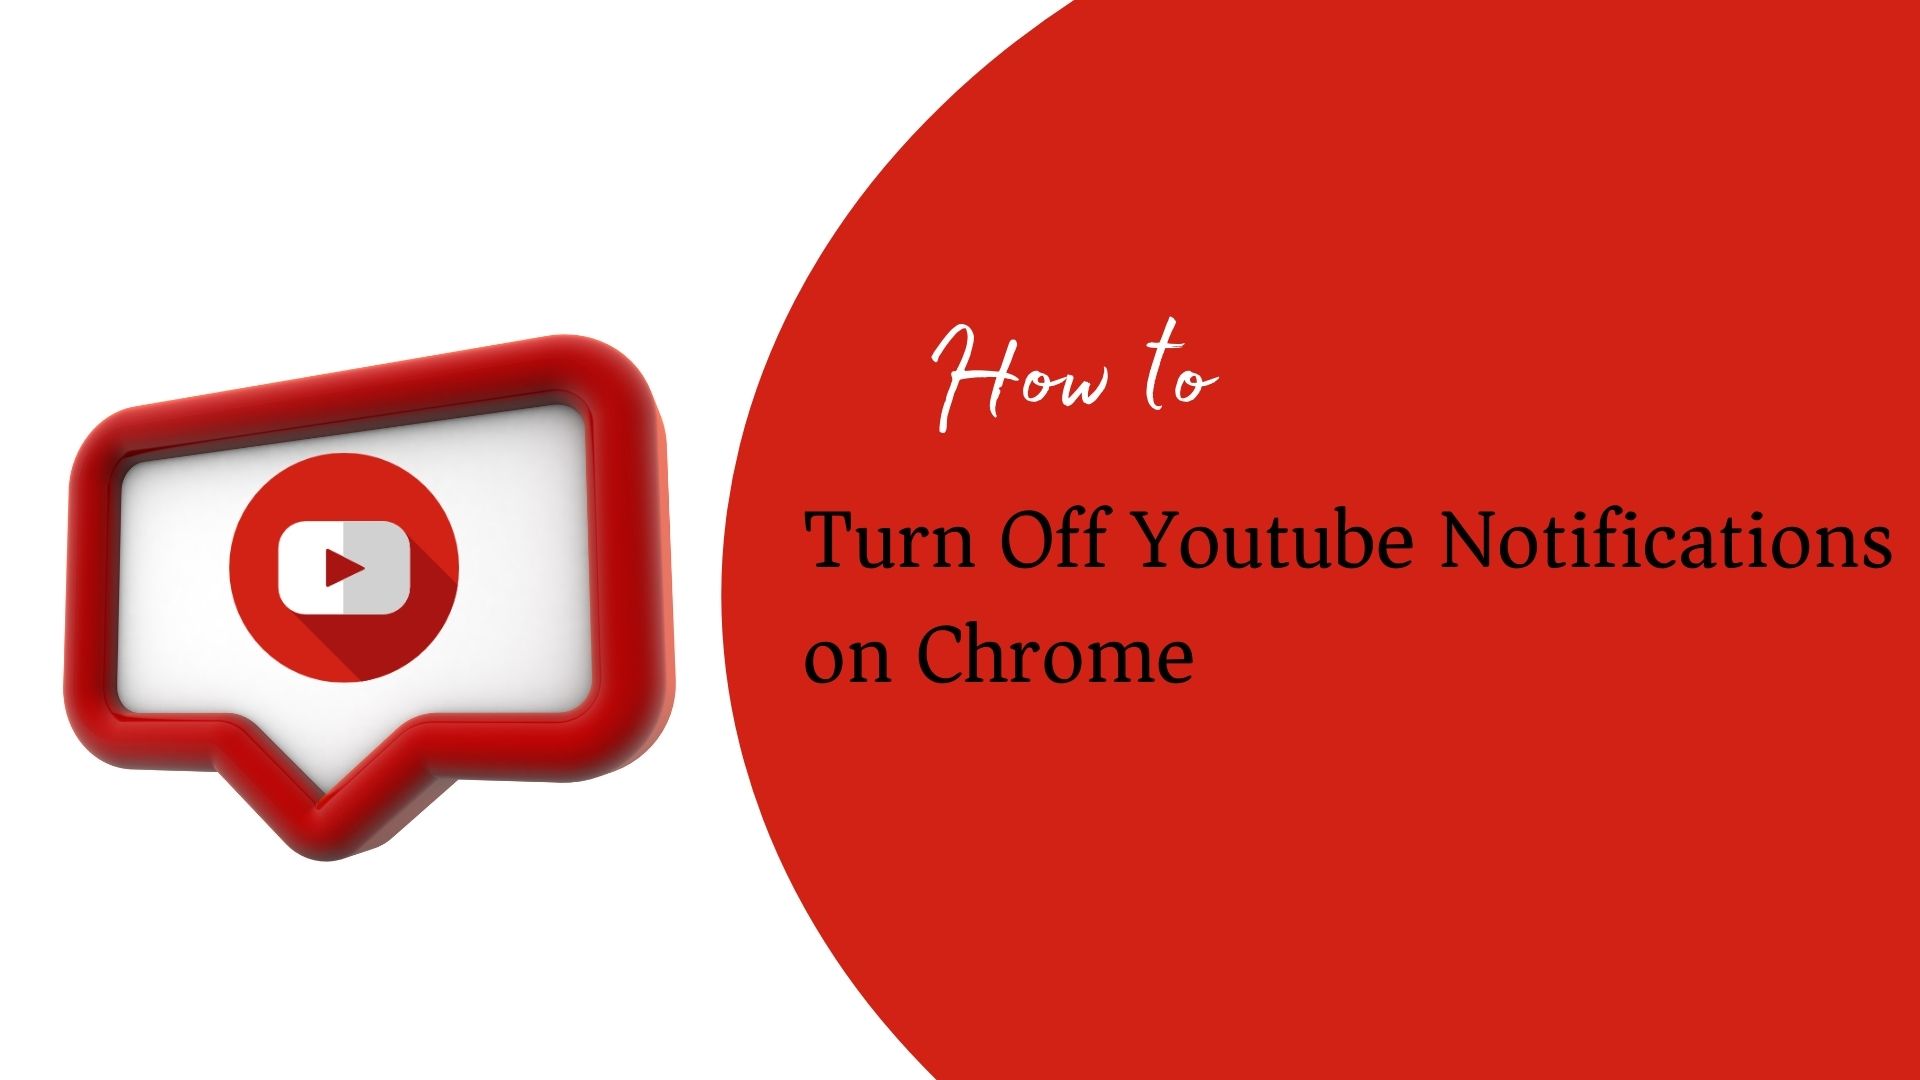 How to Turn Off Youtube Notifications on Chrome